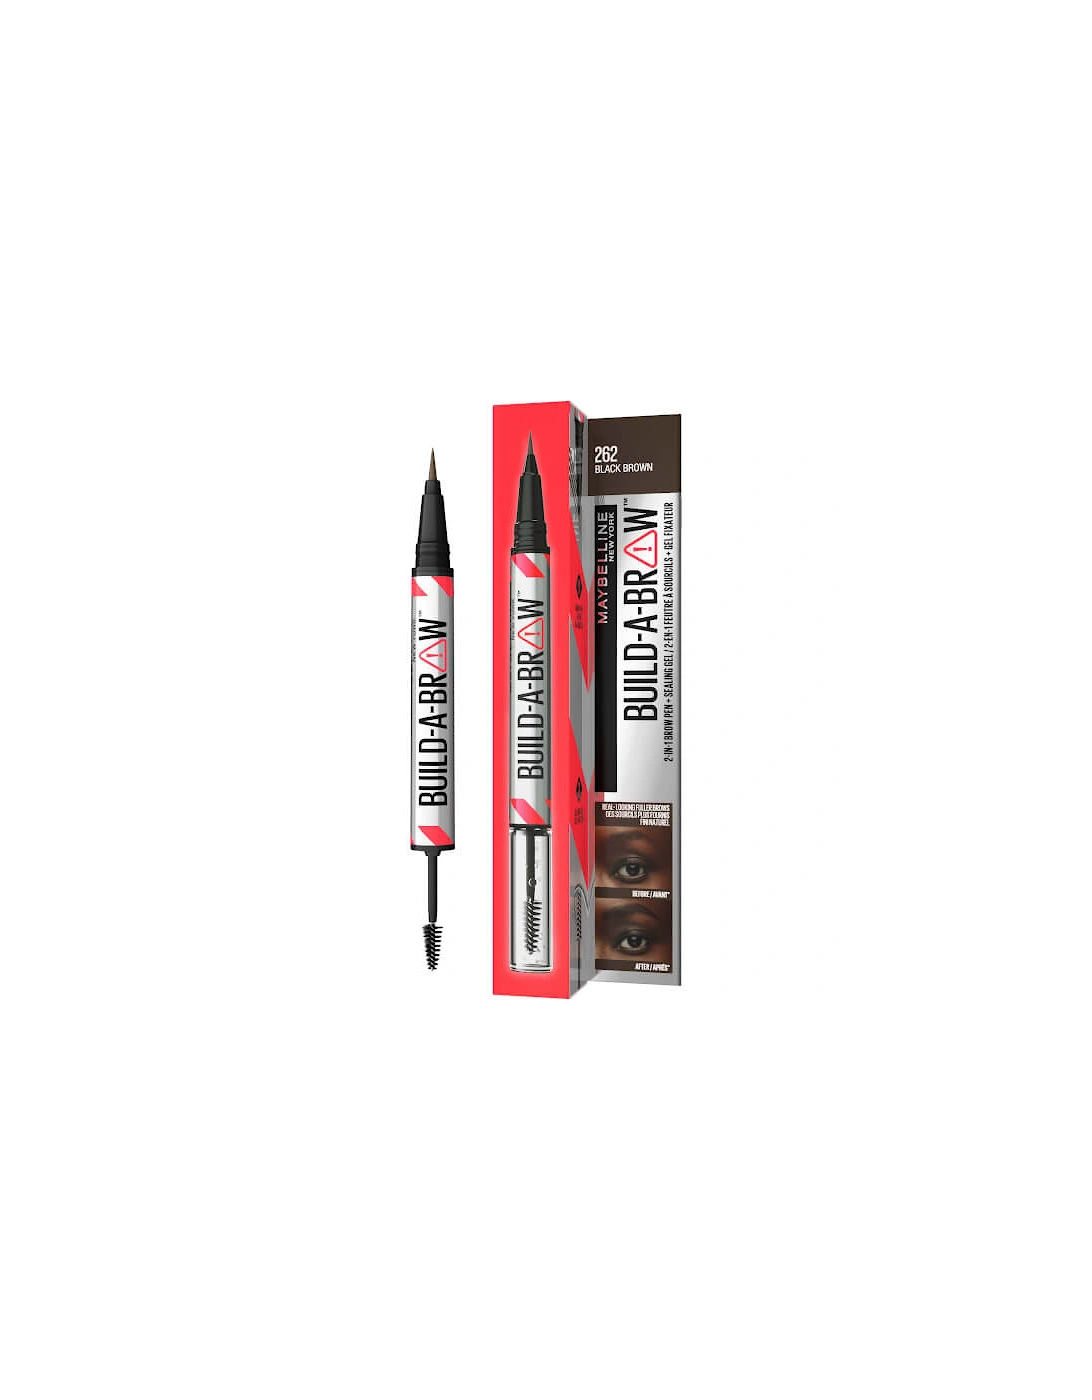 Build-A-Brow 2 Easy Steps Eye Brow Pencil and Gel - Black Brown, 2 of 1